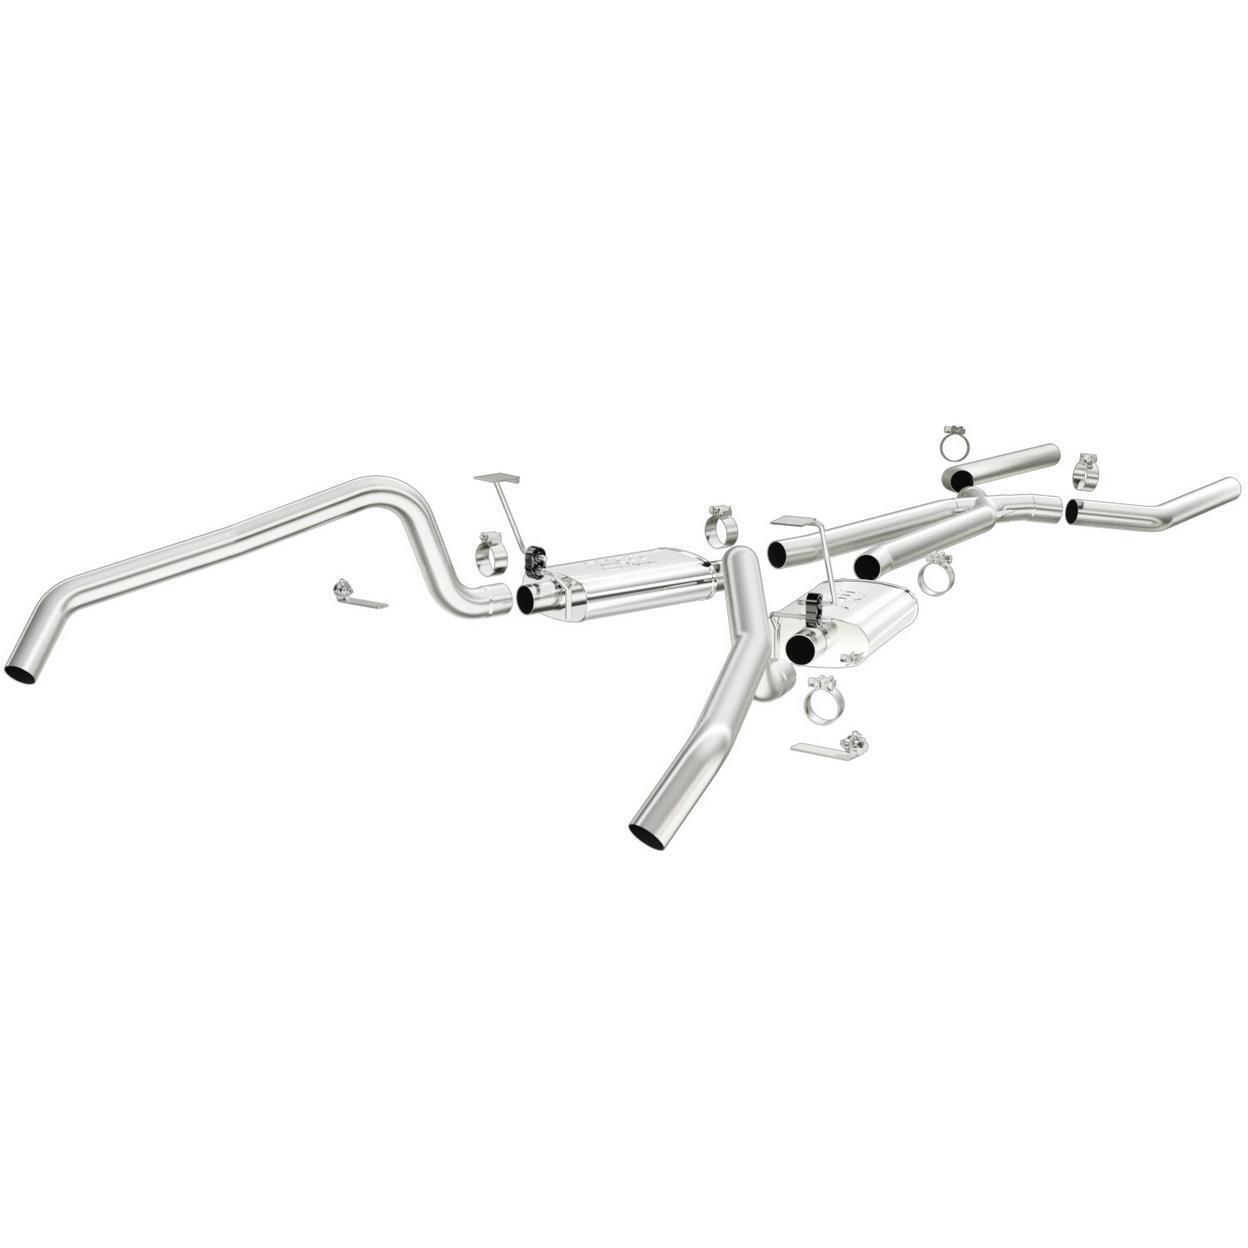 MagnaFlow 15896-VY Exhaust System Kit for 1971 Chevrolet Camaro